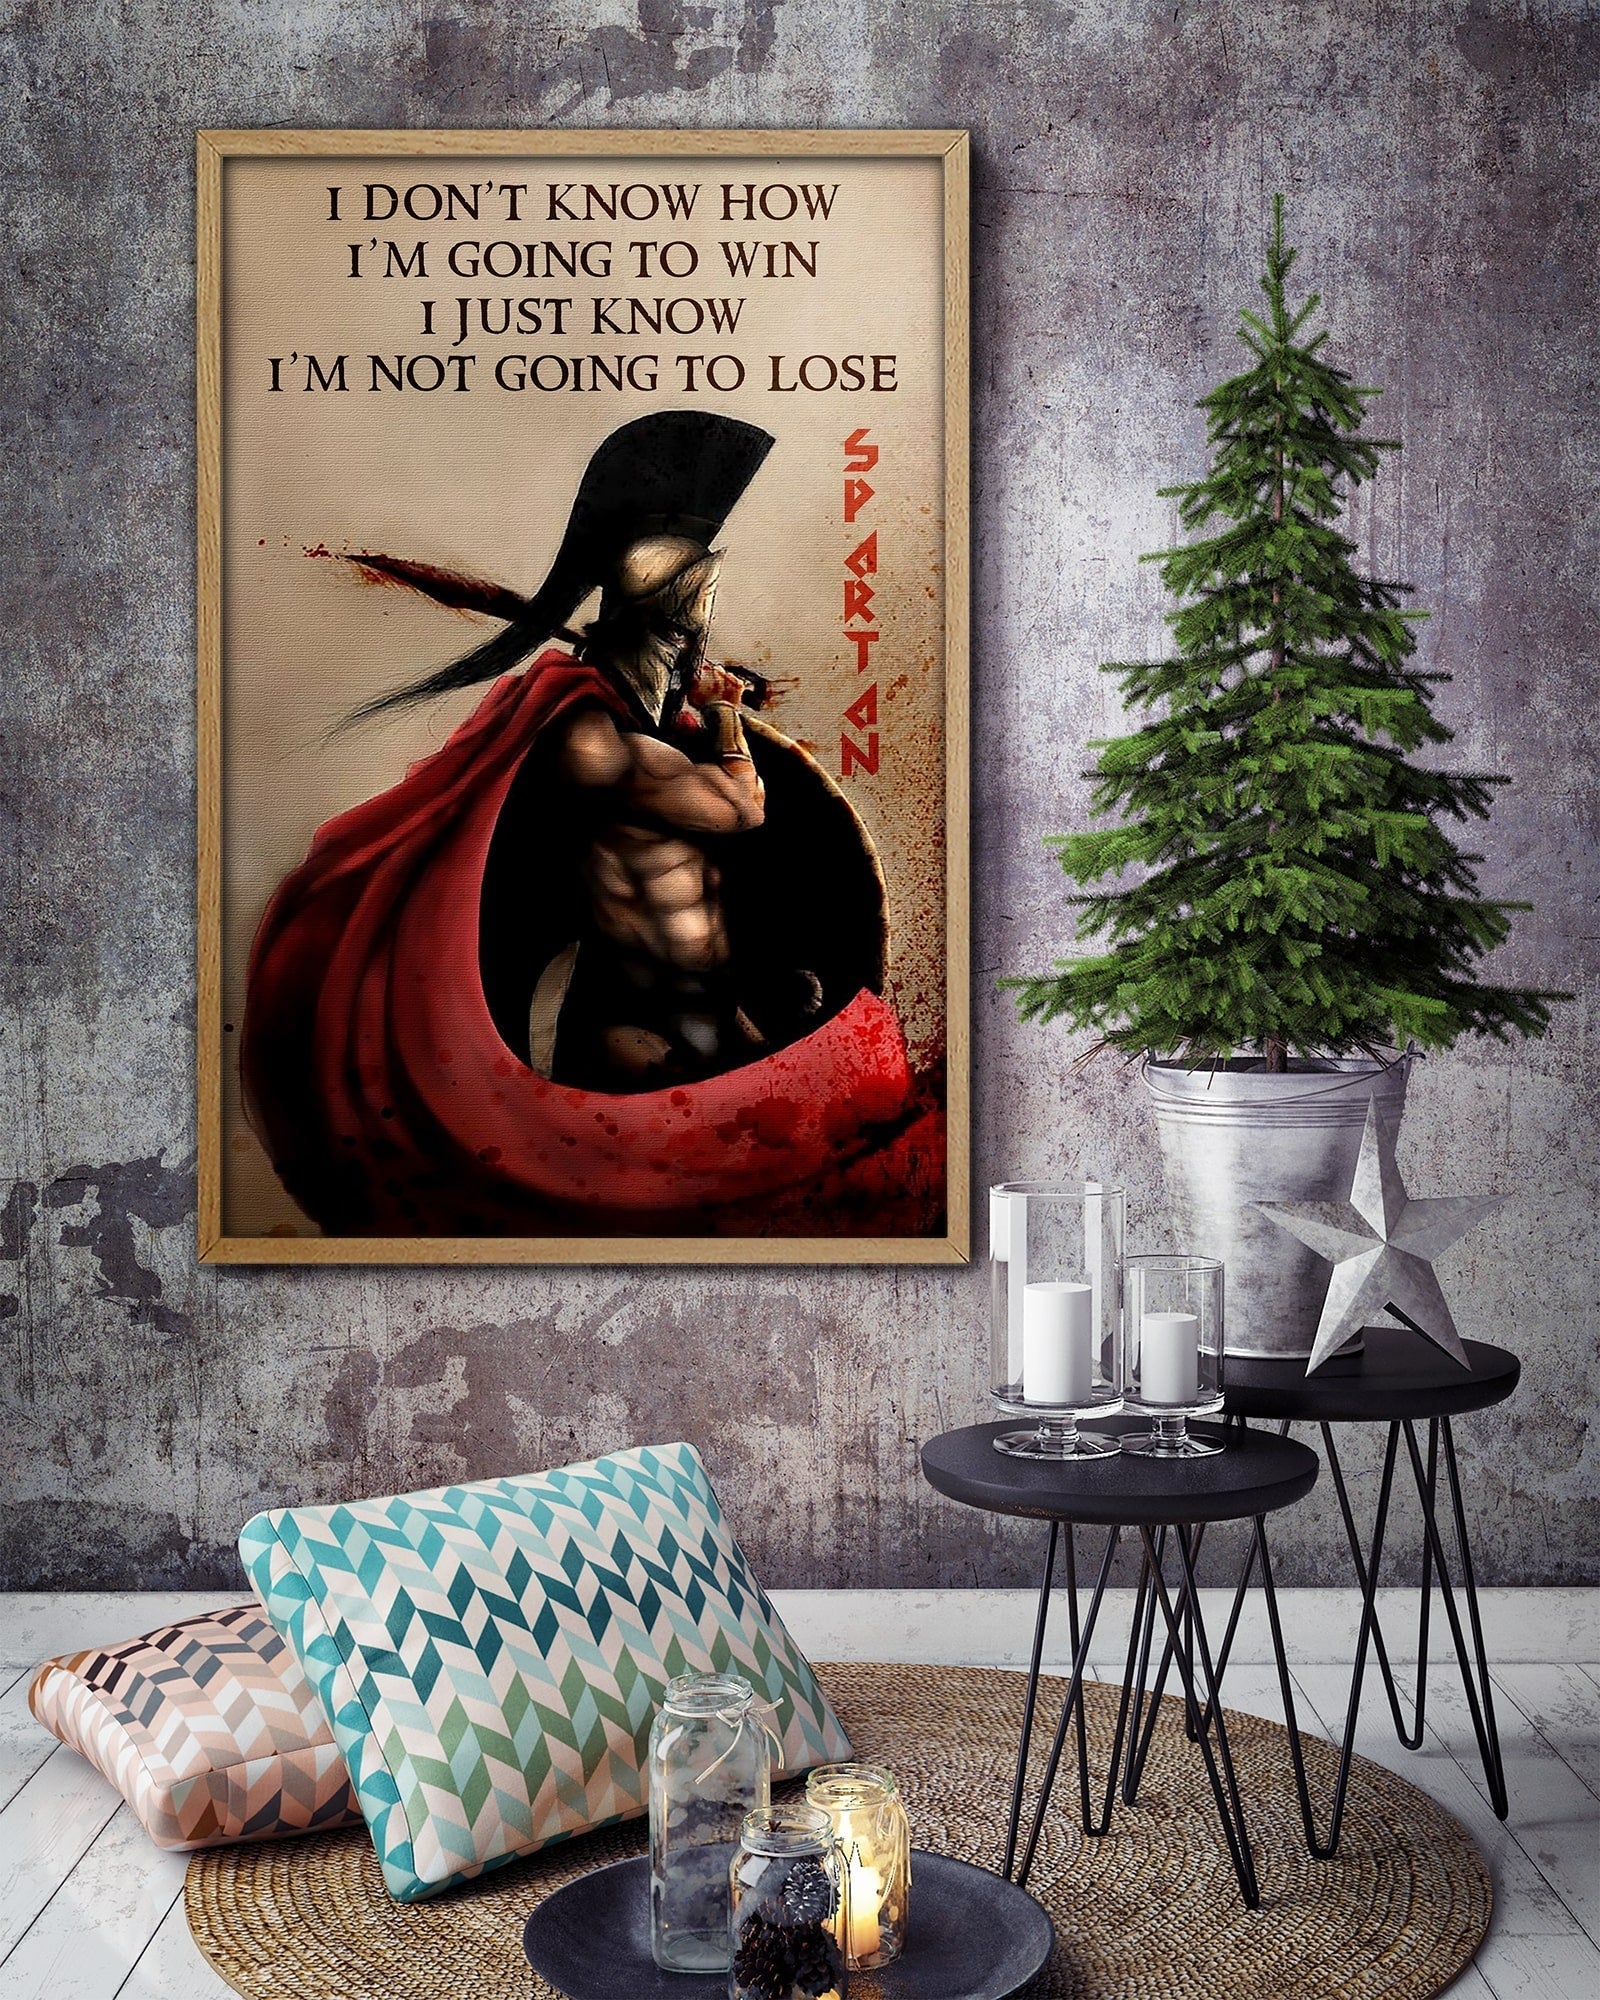 WA053 - I Don't Knoe How I'm Going To Win - I'm Just Know I’m Not Going To Lose - Spartan - Vertical Poster - Vertical Canvas - Warrior Poster